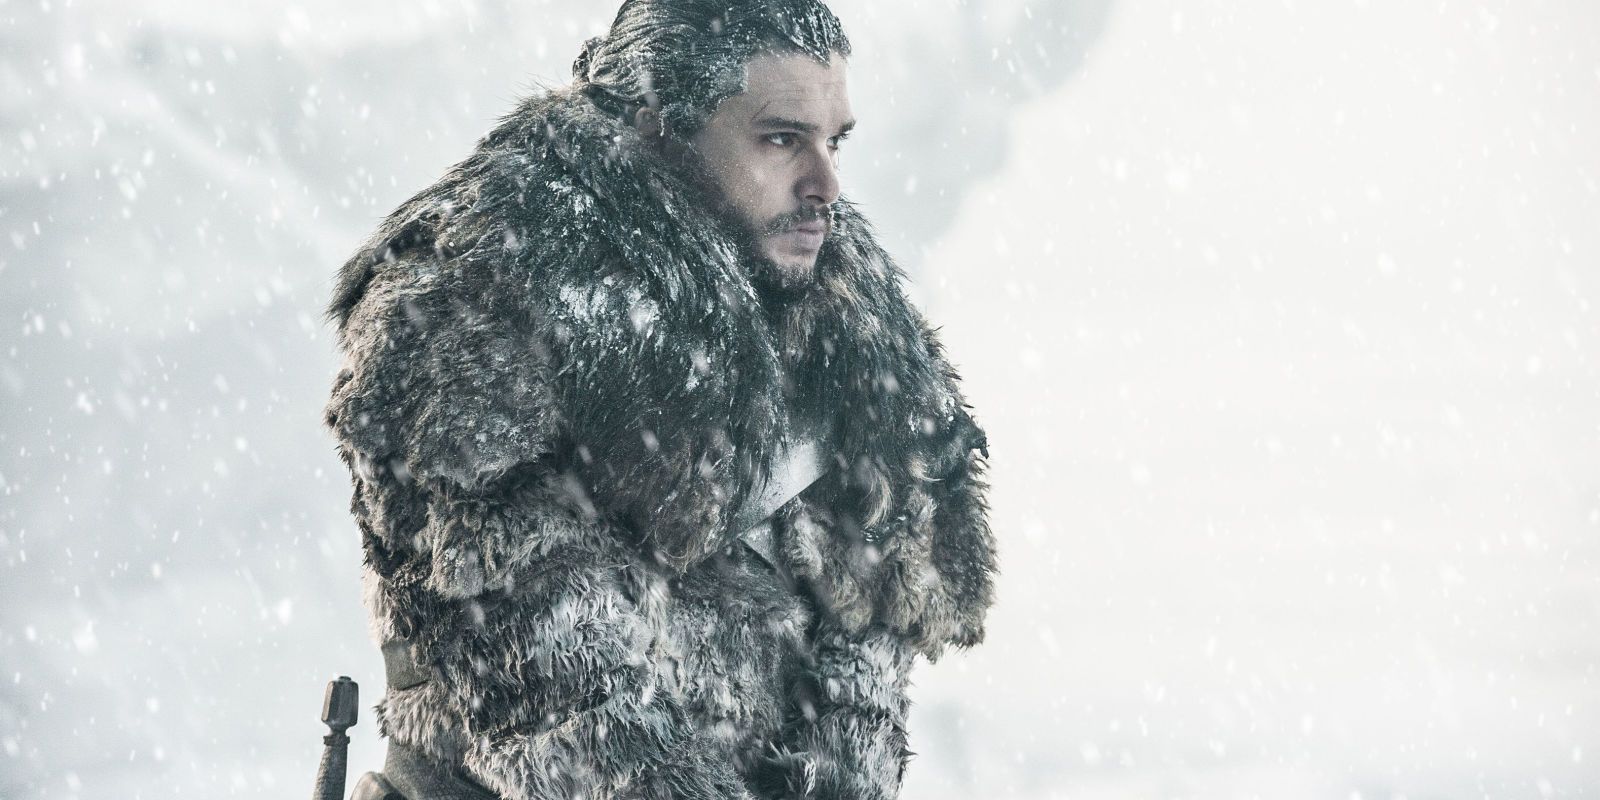 Jon Snow standing in the cold